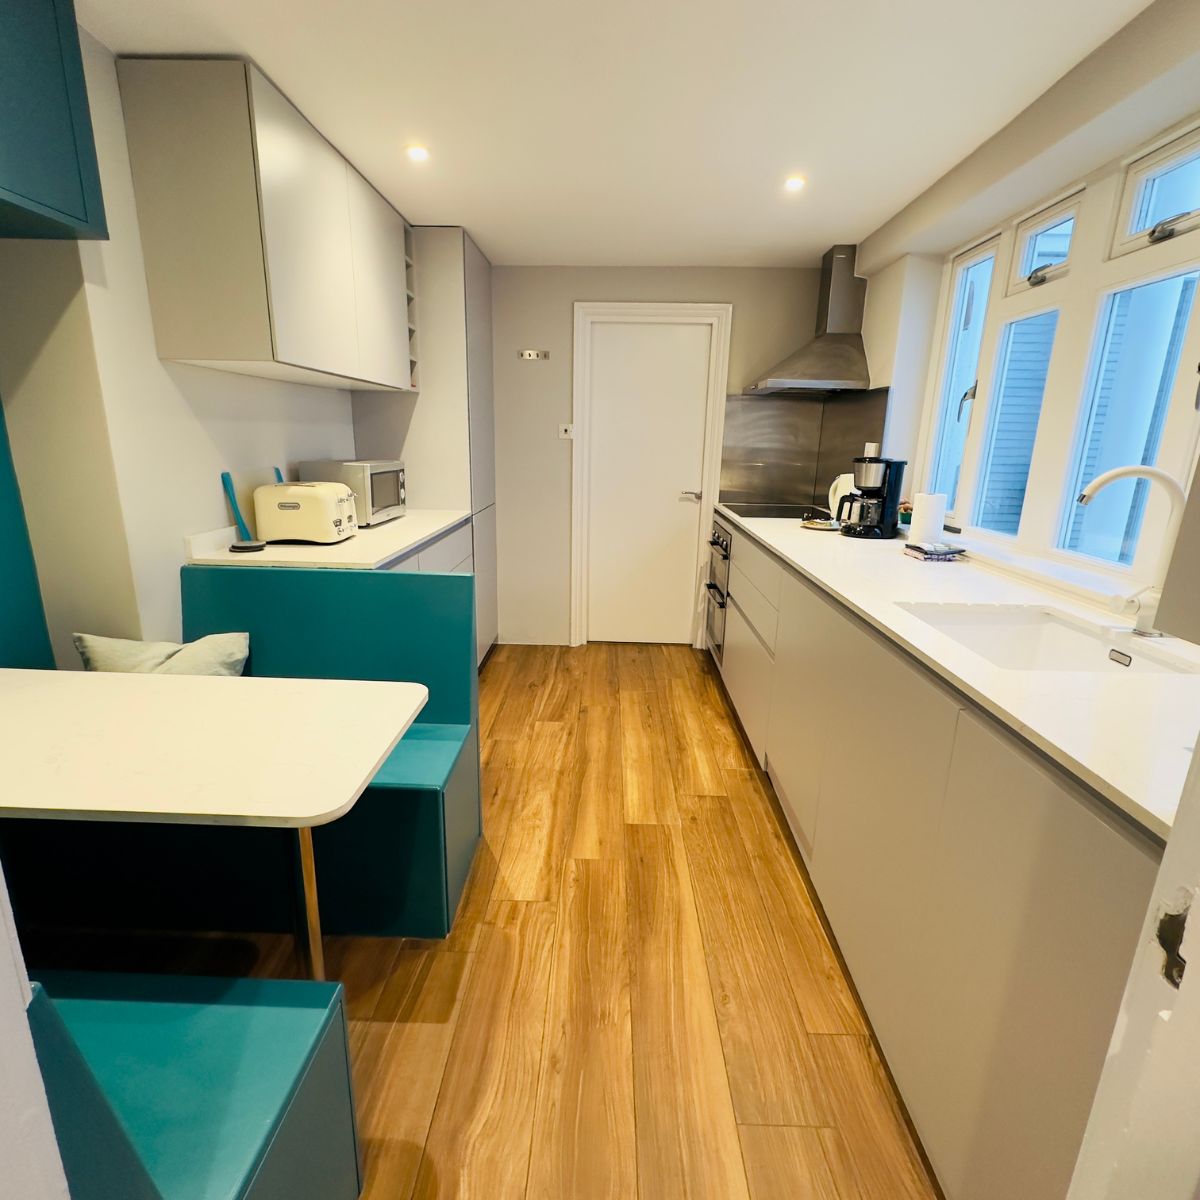 The kitchen inside a London AirBNB rental.